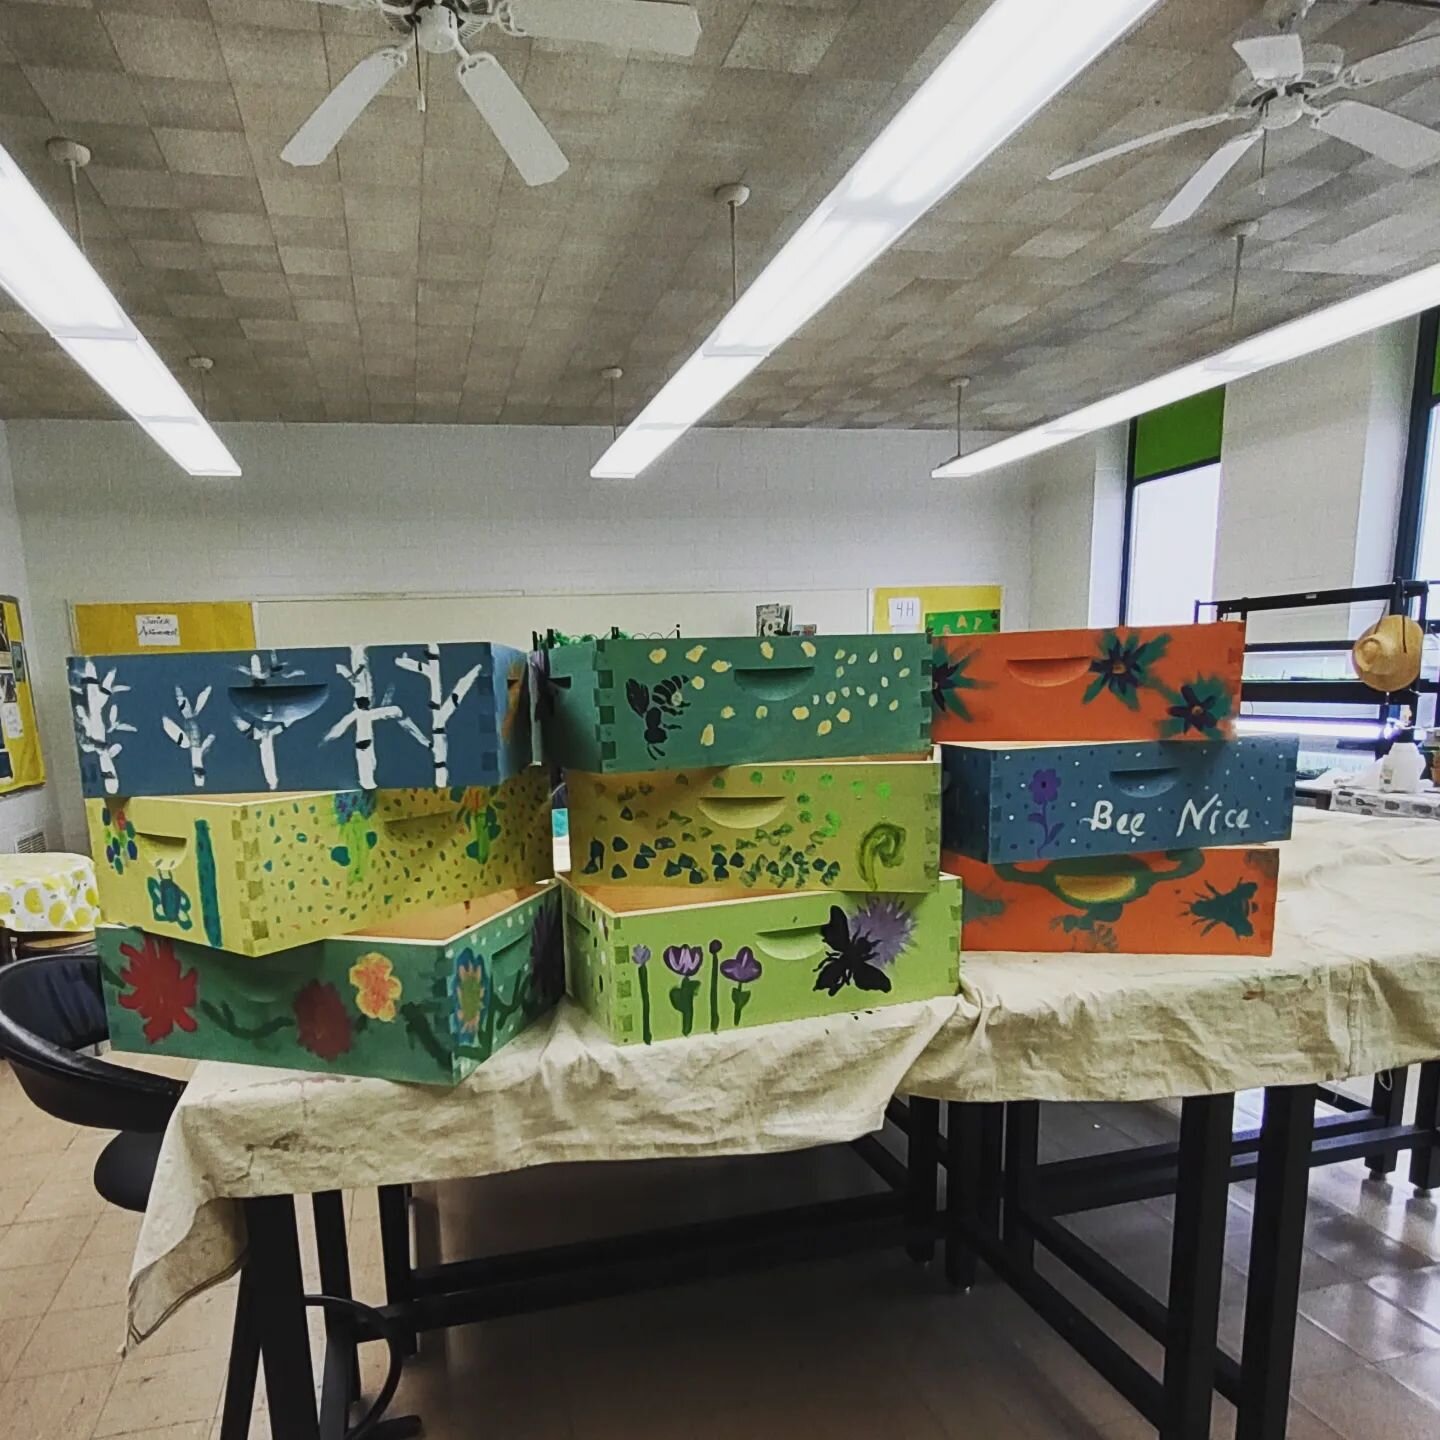 Our Hive Boxes are &quot;Bee&quot;Utiful! 
#Bellevue4HClub had a great time decorating these boxes provided by @justbeesassy !! Stop by and see them for yourself this season 🐝🍯🐝🍯
Be sure to Join Us for our Annual Garden Volunteer Day; Saturday Ap